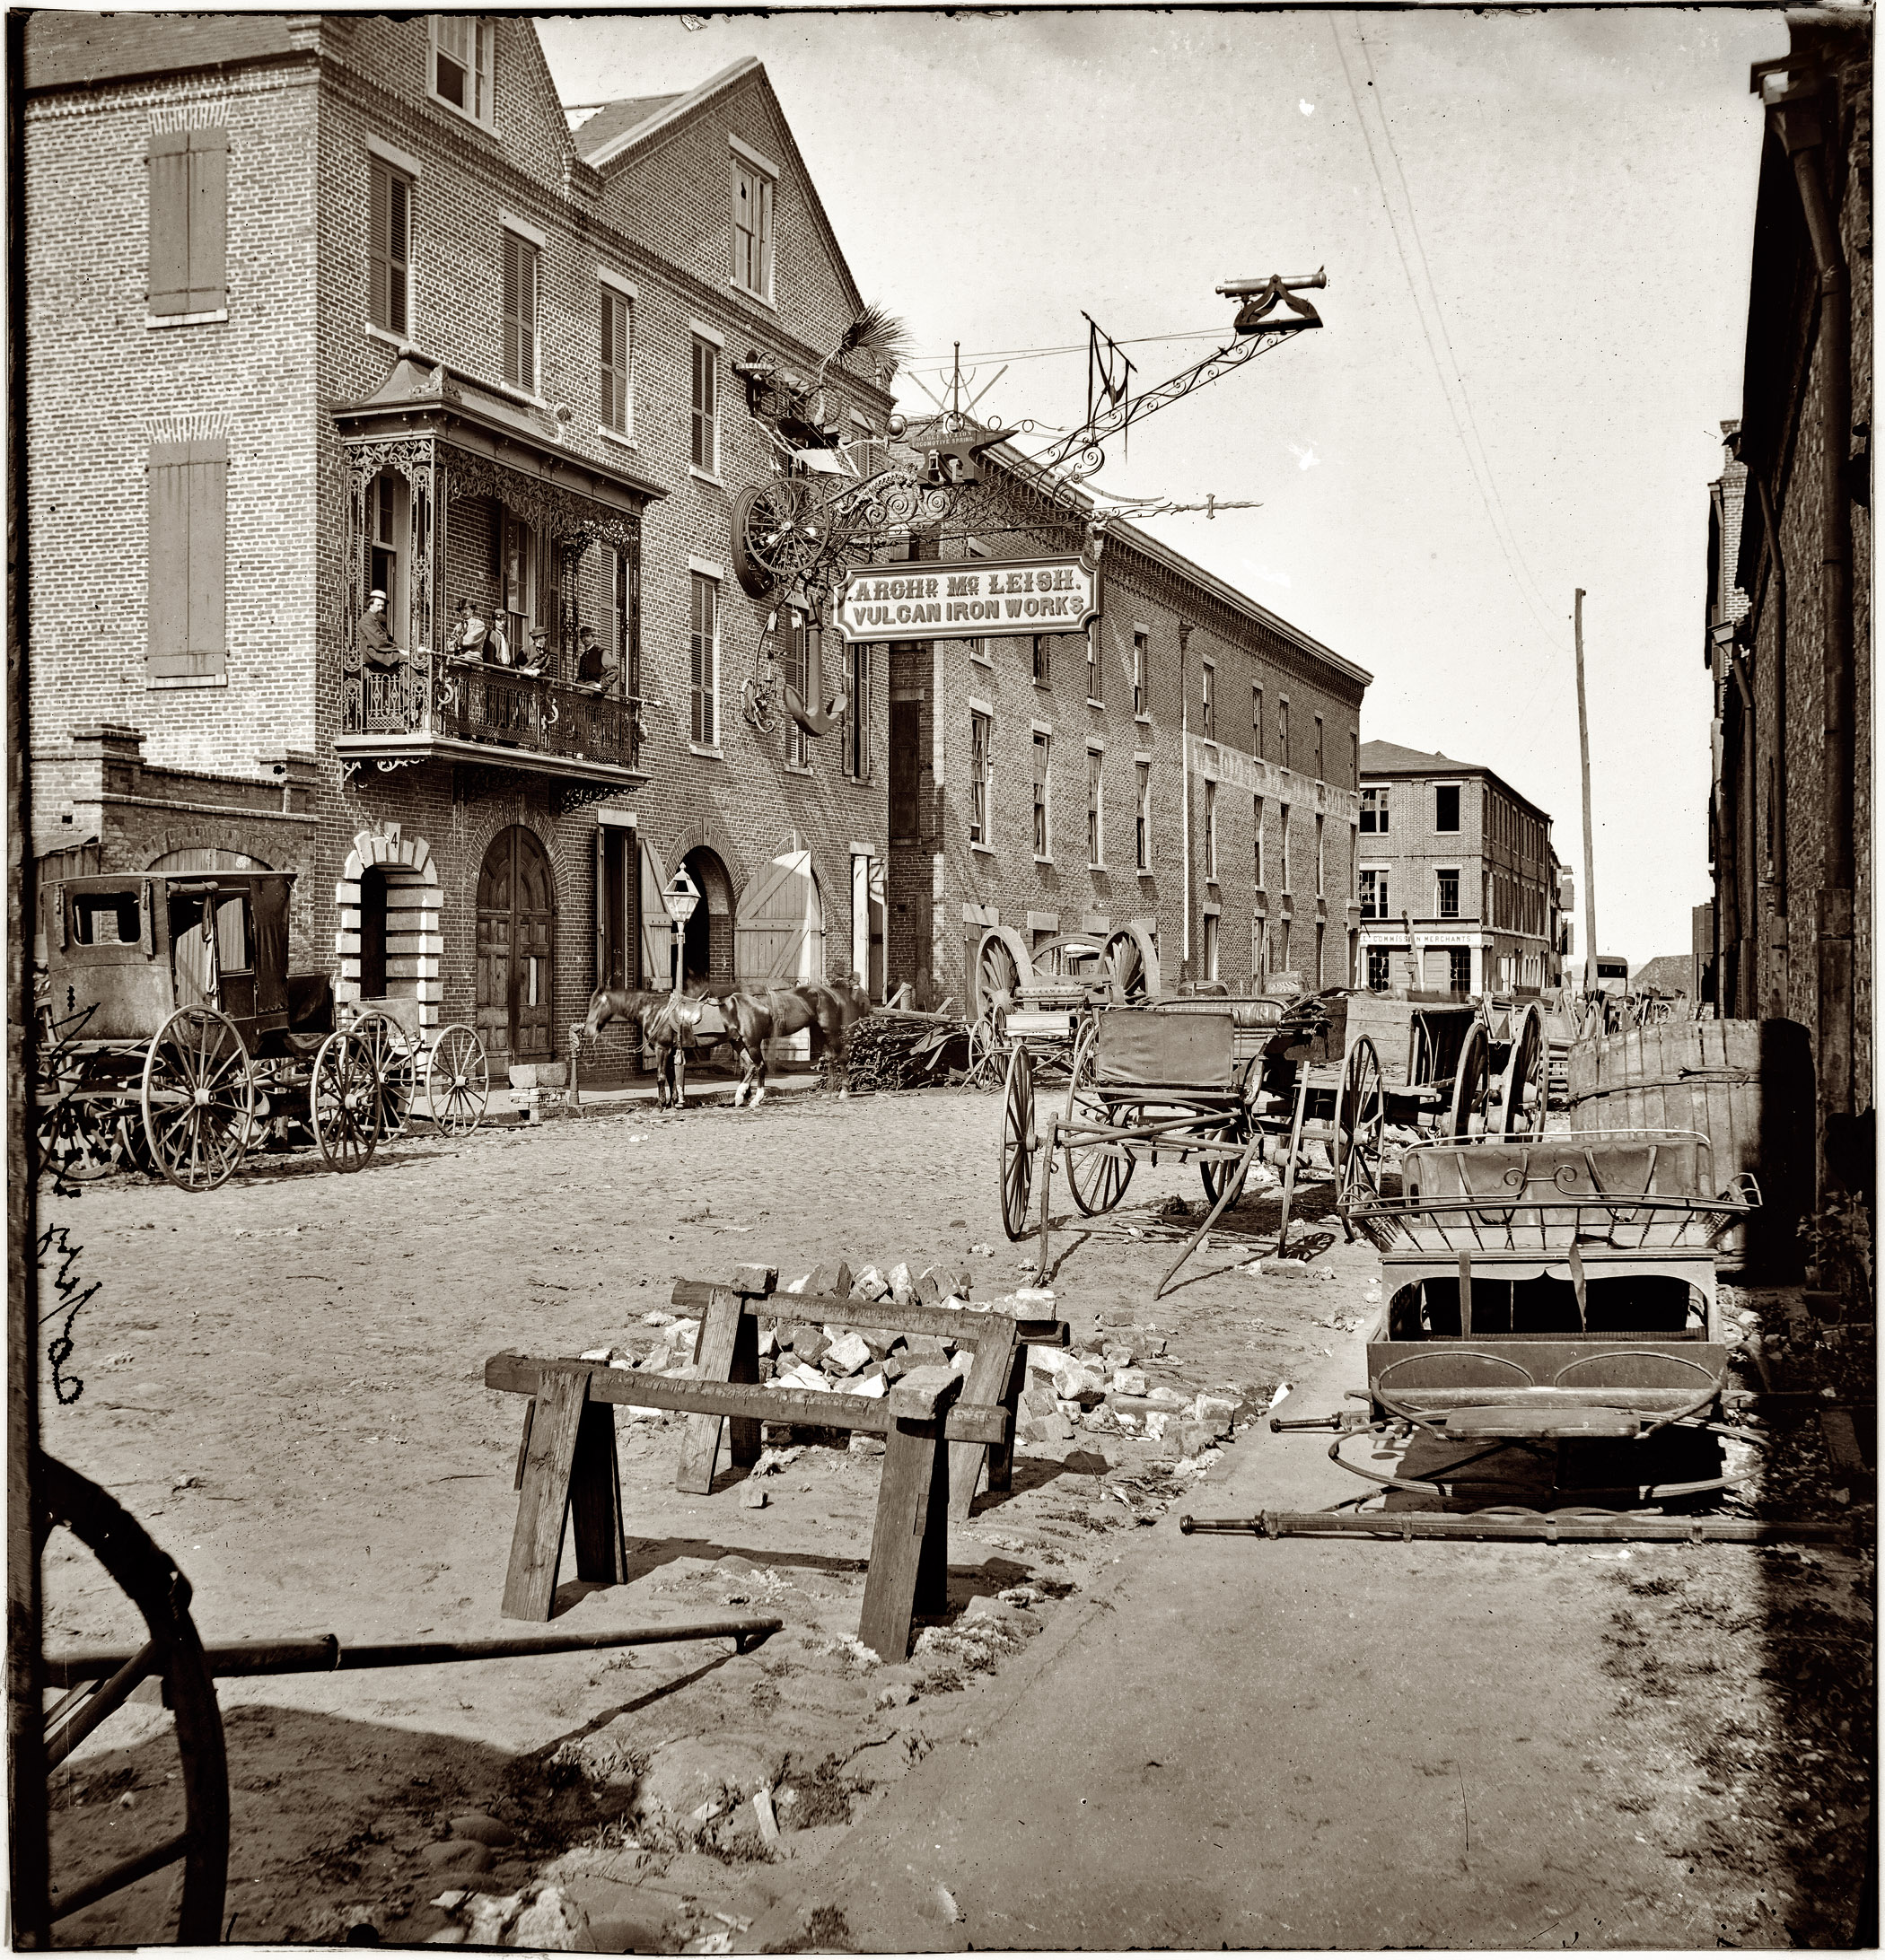 1865. Charleston, South Carolina. Archibald McLeish's Vulcan Iron Works on Cumberland Street. Left half of glass-plate stereograph, from photographs of the Federal Navy and seaborne expeditions against the Atlantic Coast of the Confederacy, 1863-1865. View full size. Note the unusually elaborate sign, as well as what seem to be the giant wheels of an artillery carriage.